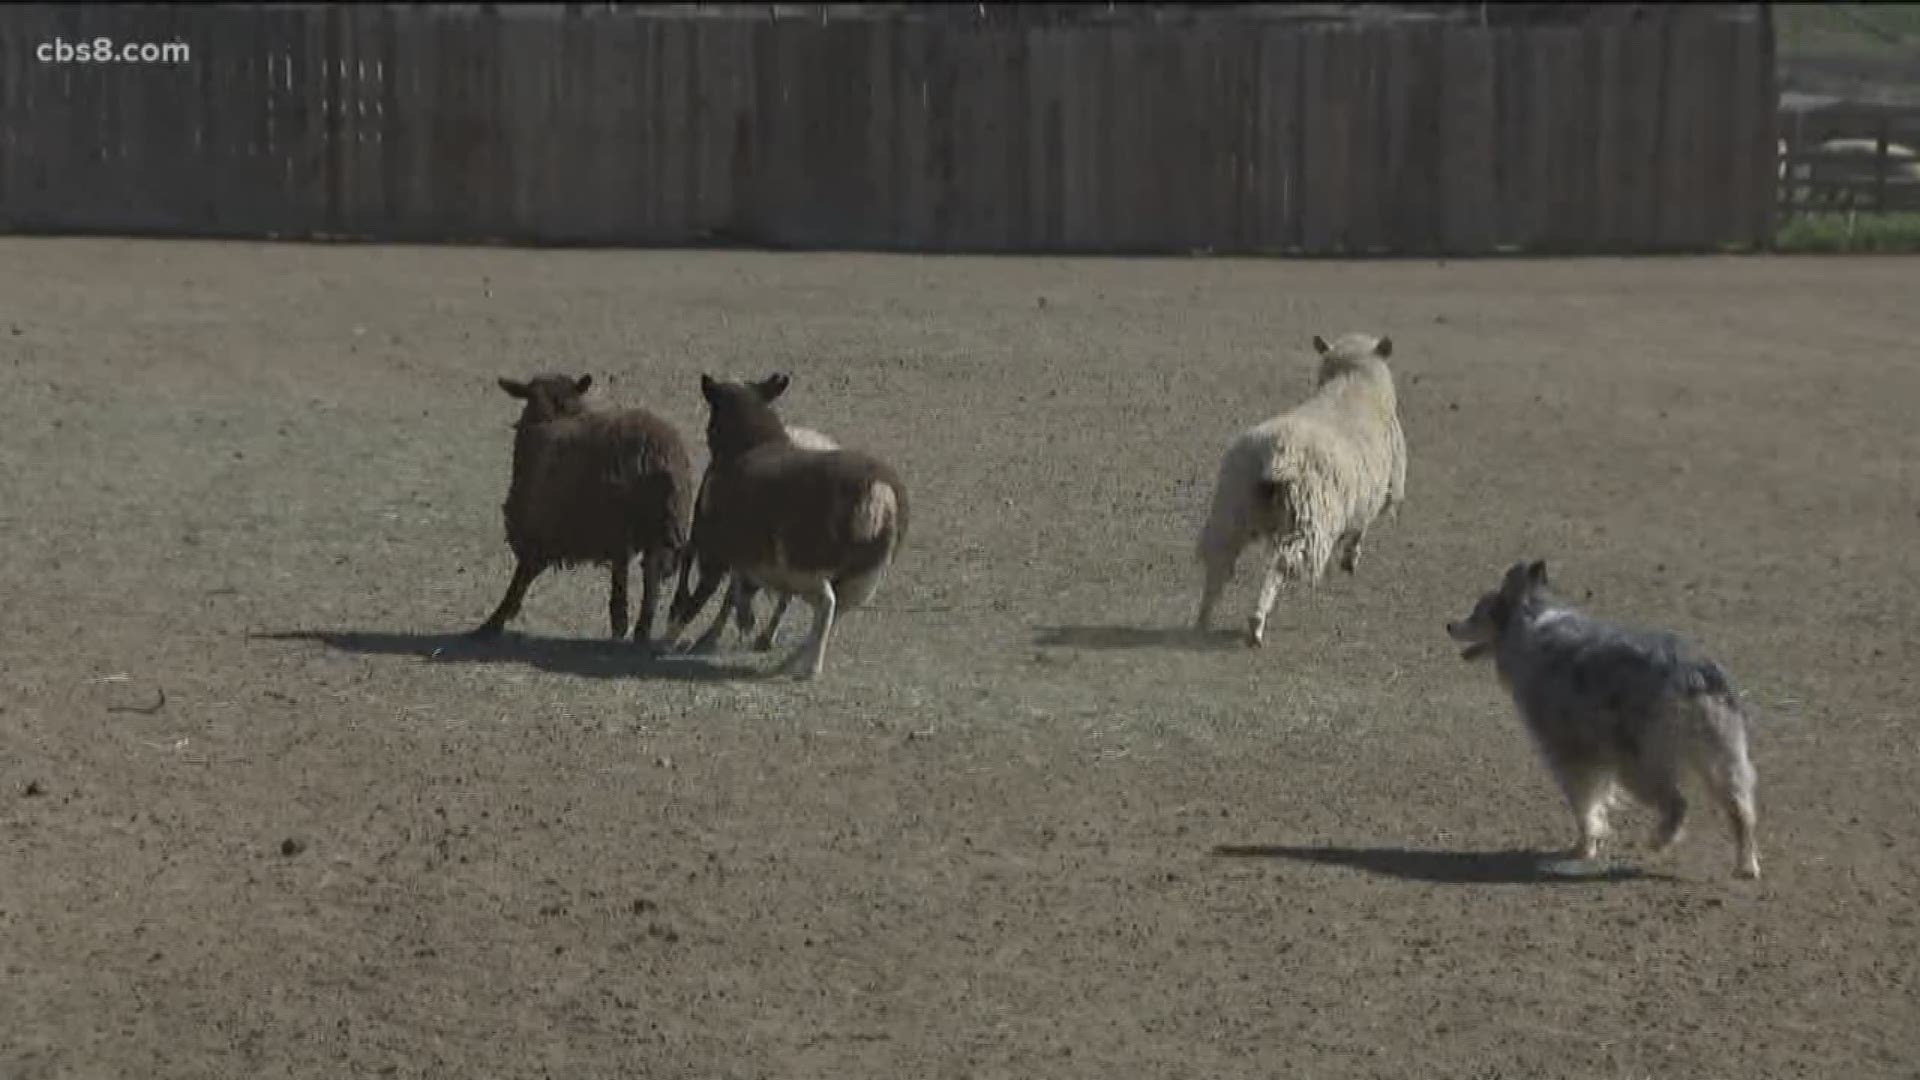 Dogs of all breeds can take part in the shepherding competition in Escondido.